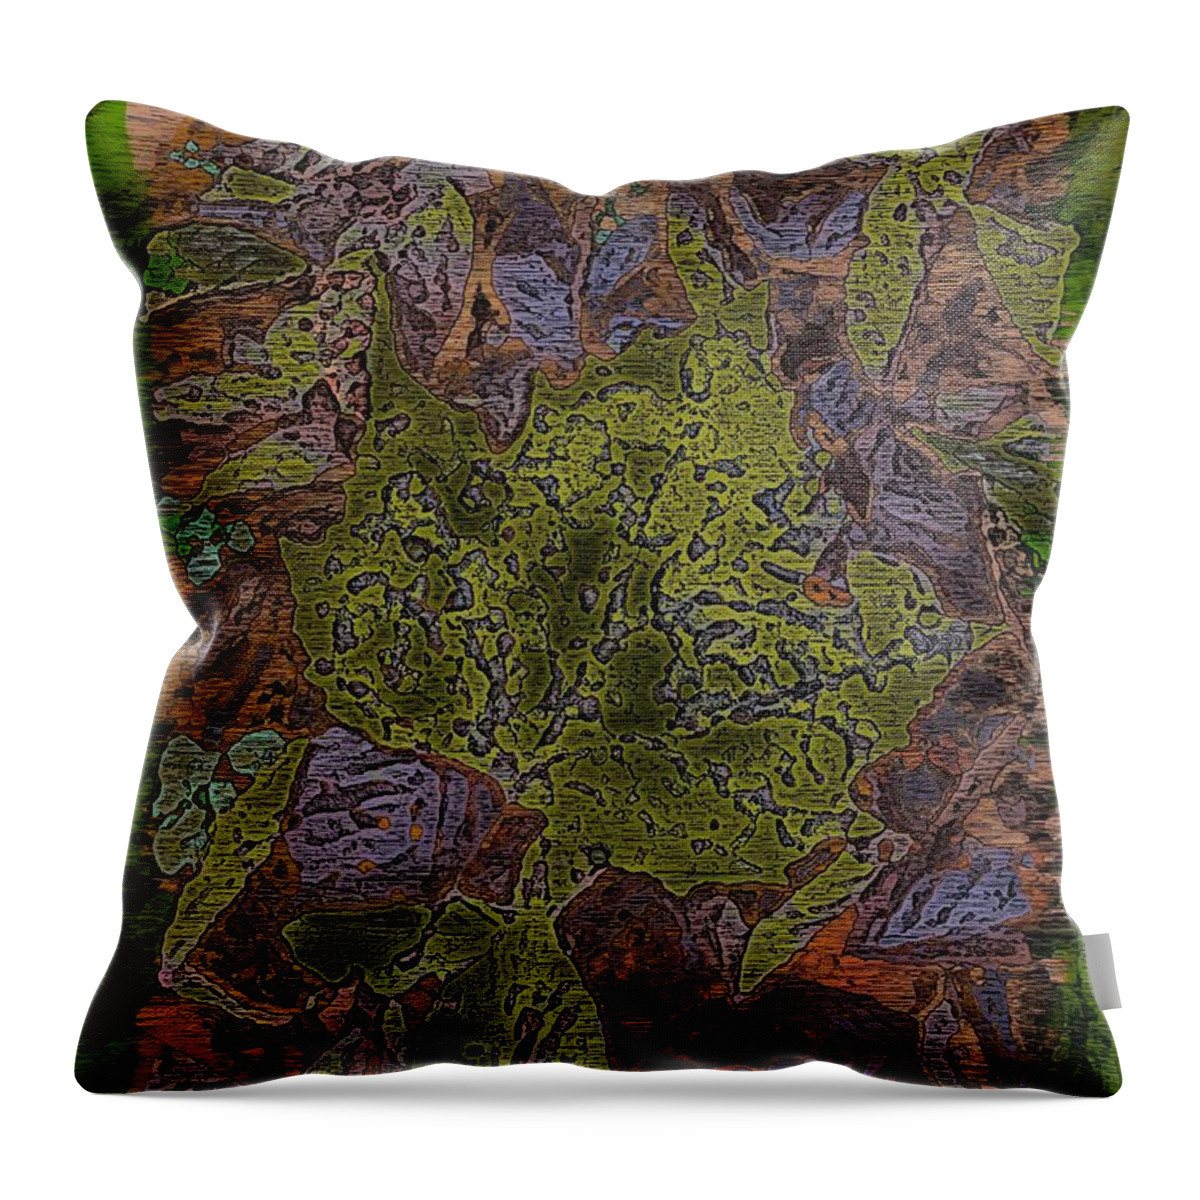 Leaves Throw Pillow featuring the digital art Leafy Goodness by Tim Allen